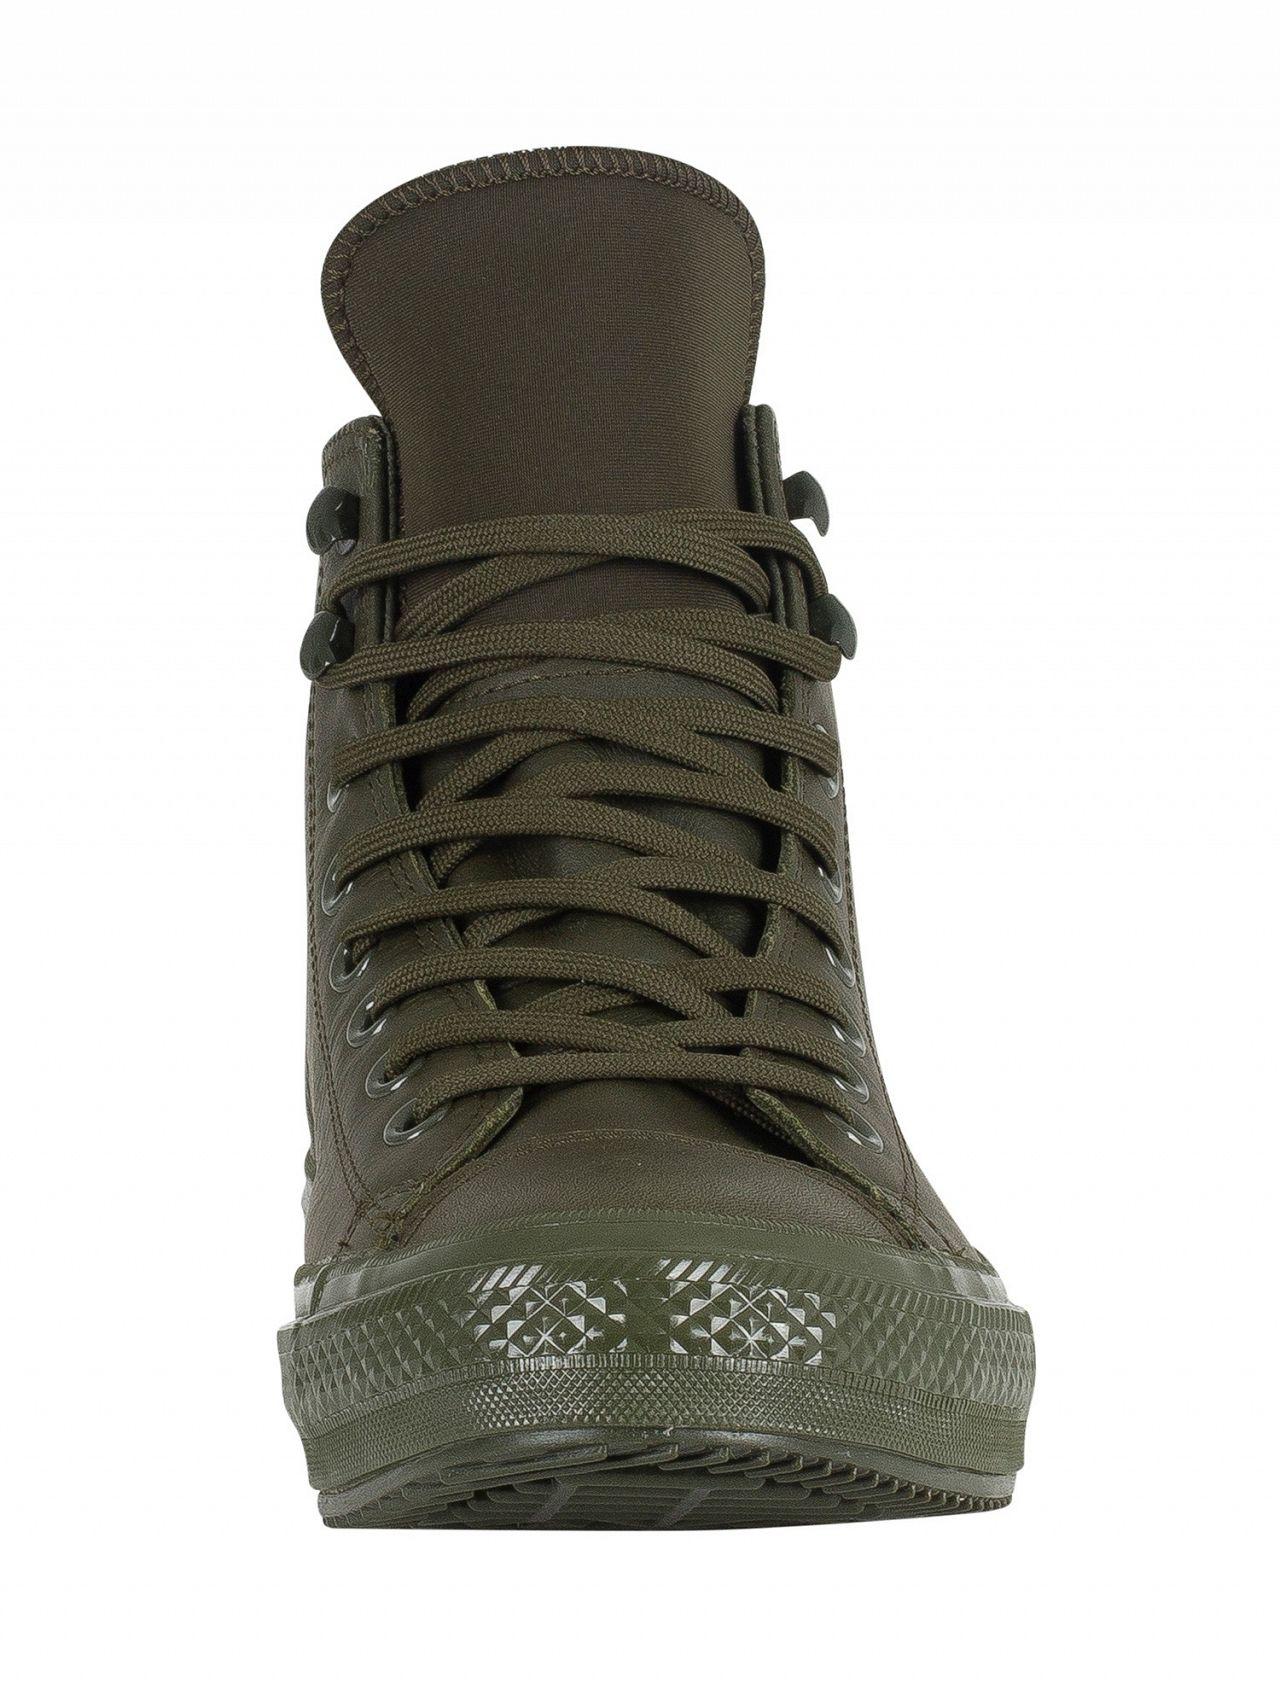 Converse Utility Green Ct All Star Hi Wp Leather Boots for Men | Lyst